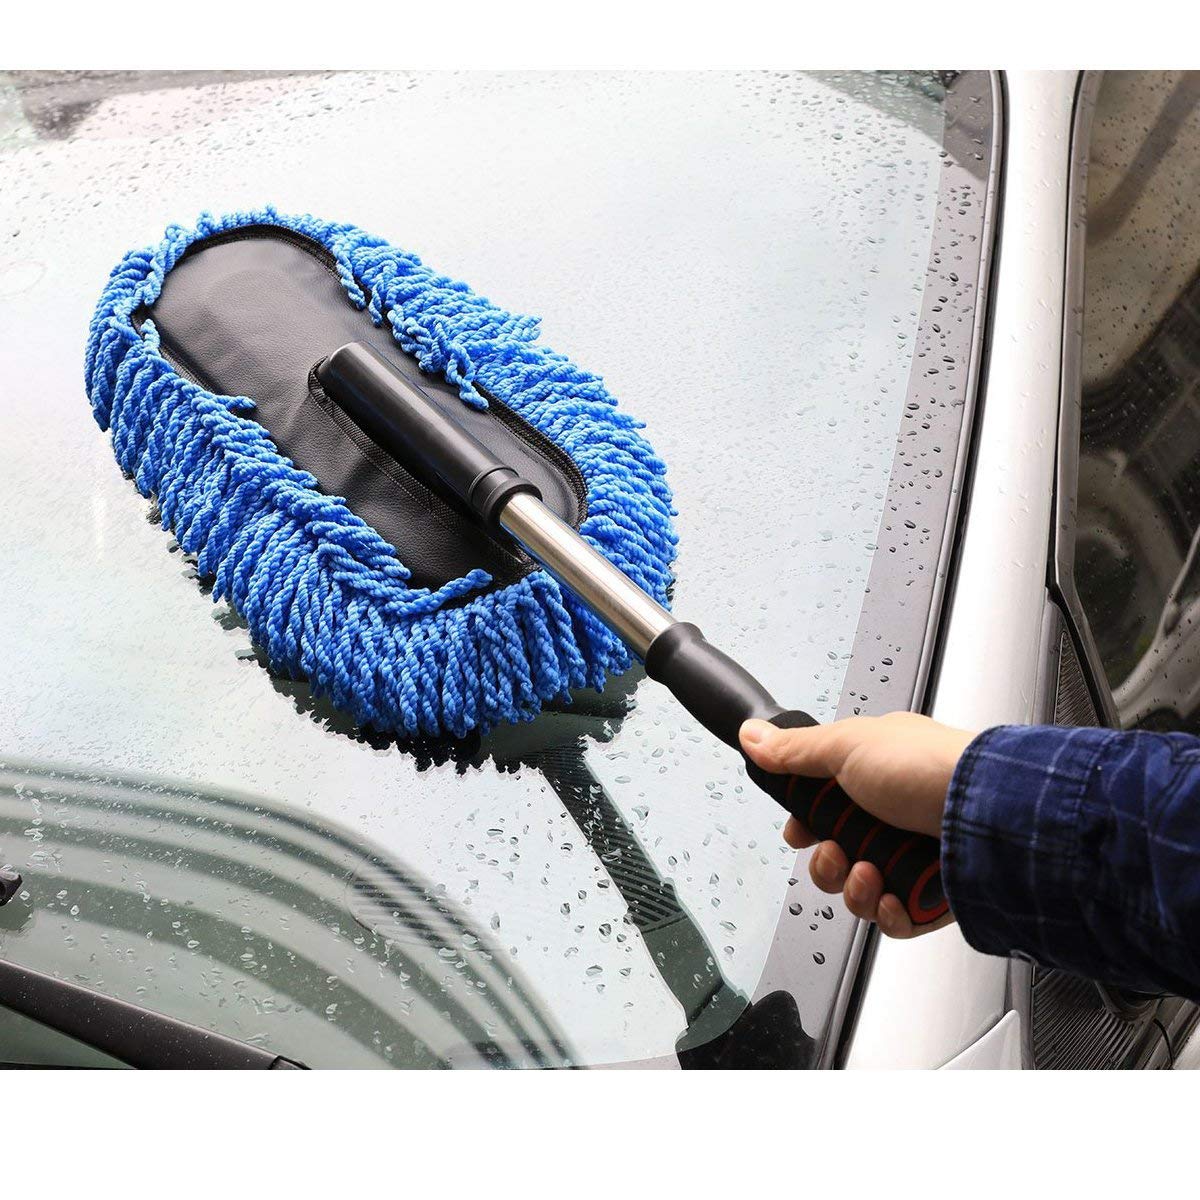 Car Wash Brush, Antistatic Car Wax Brush, for removing dust cloths from the car, removable telescopic handle, car brush